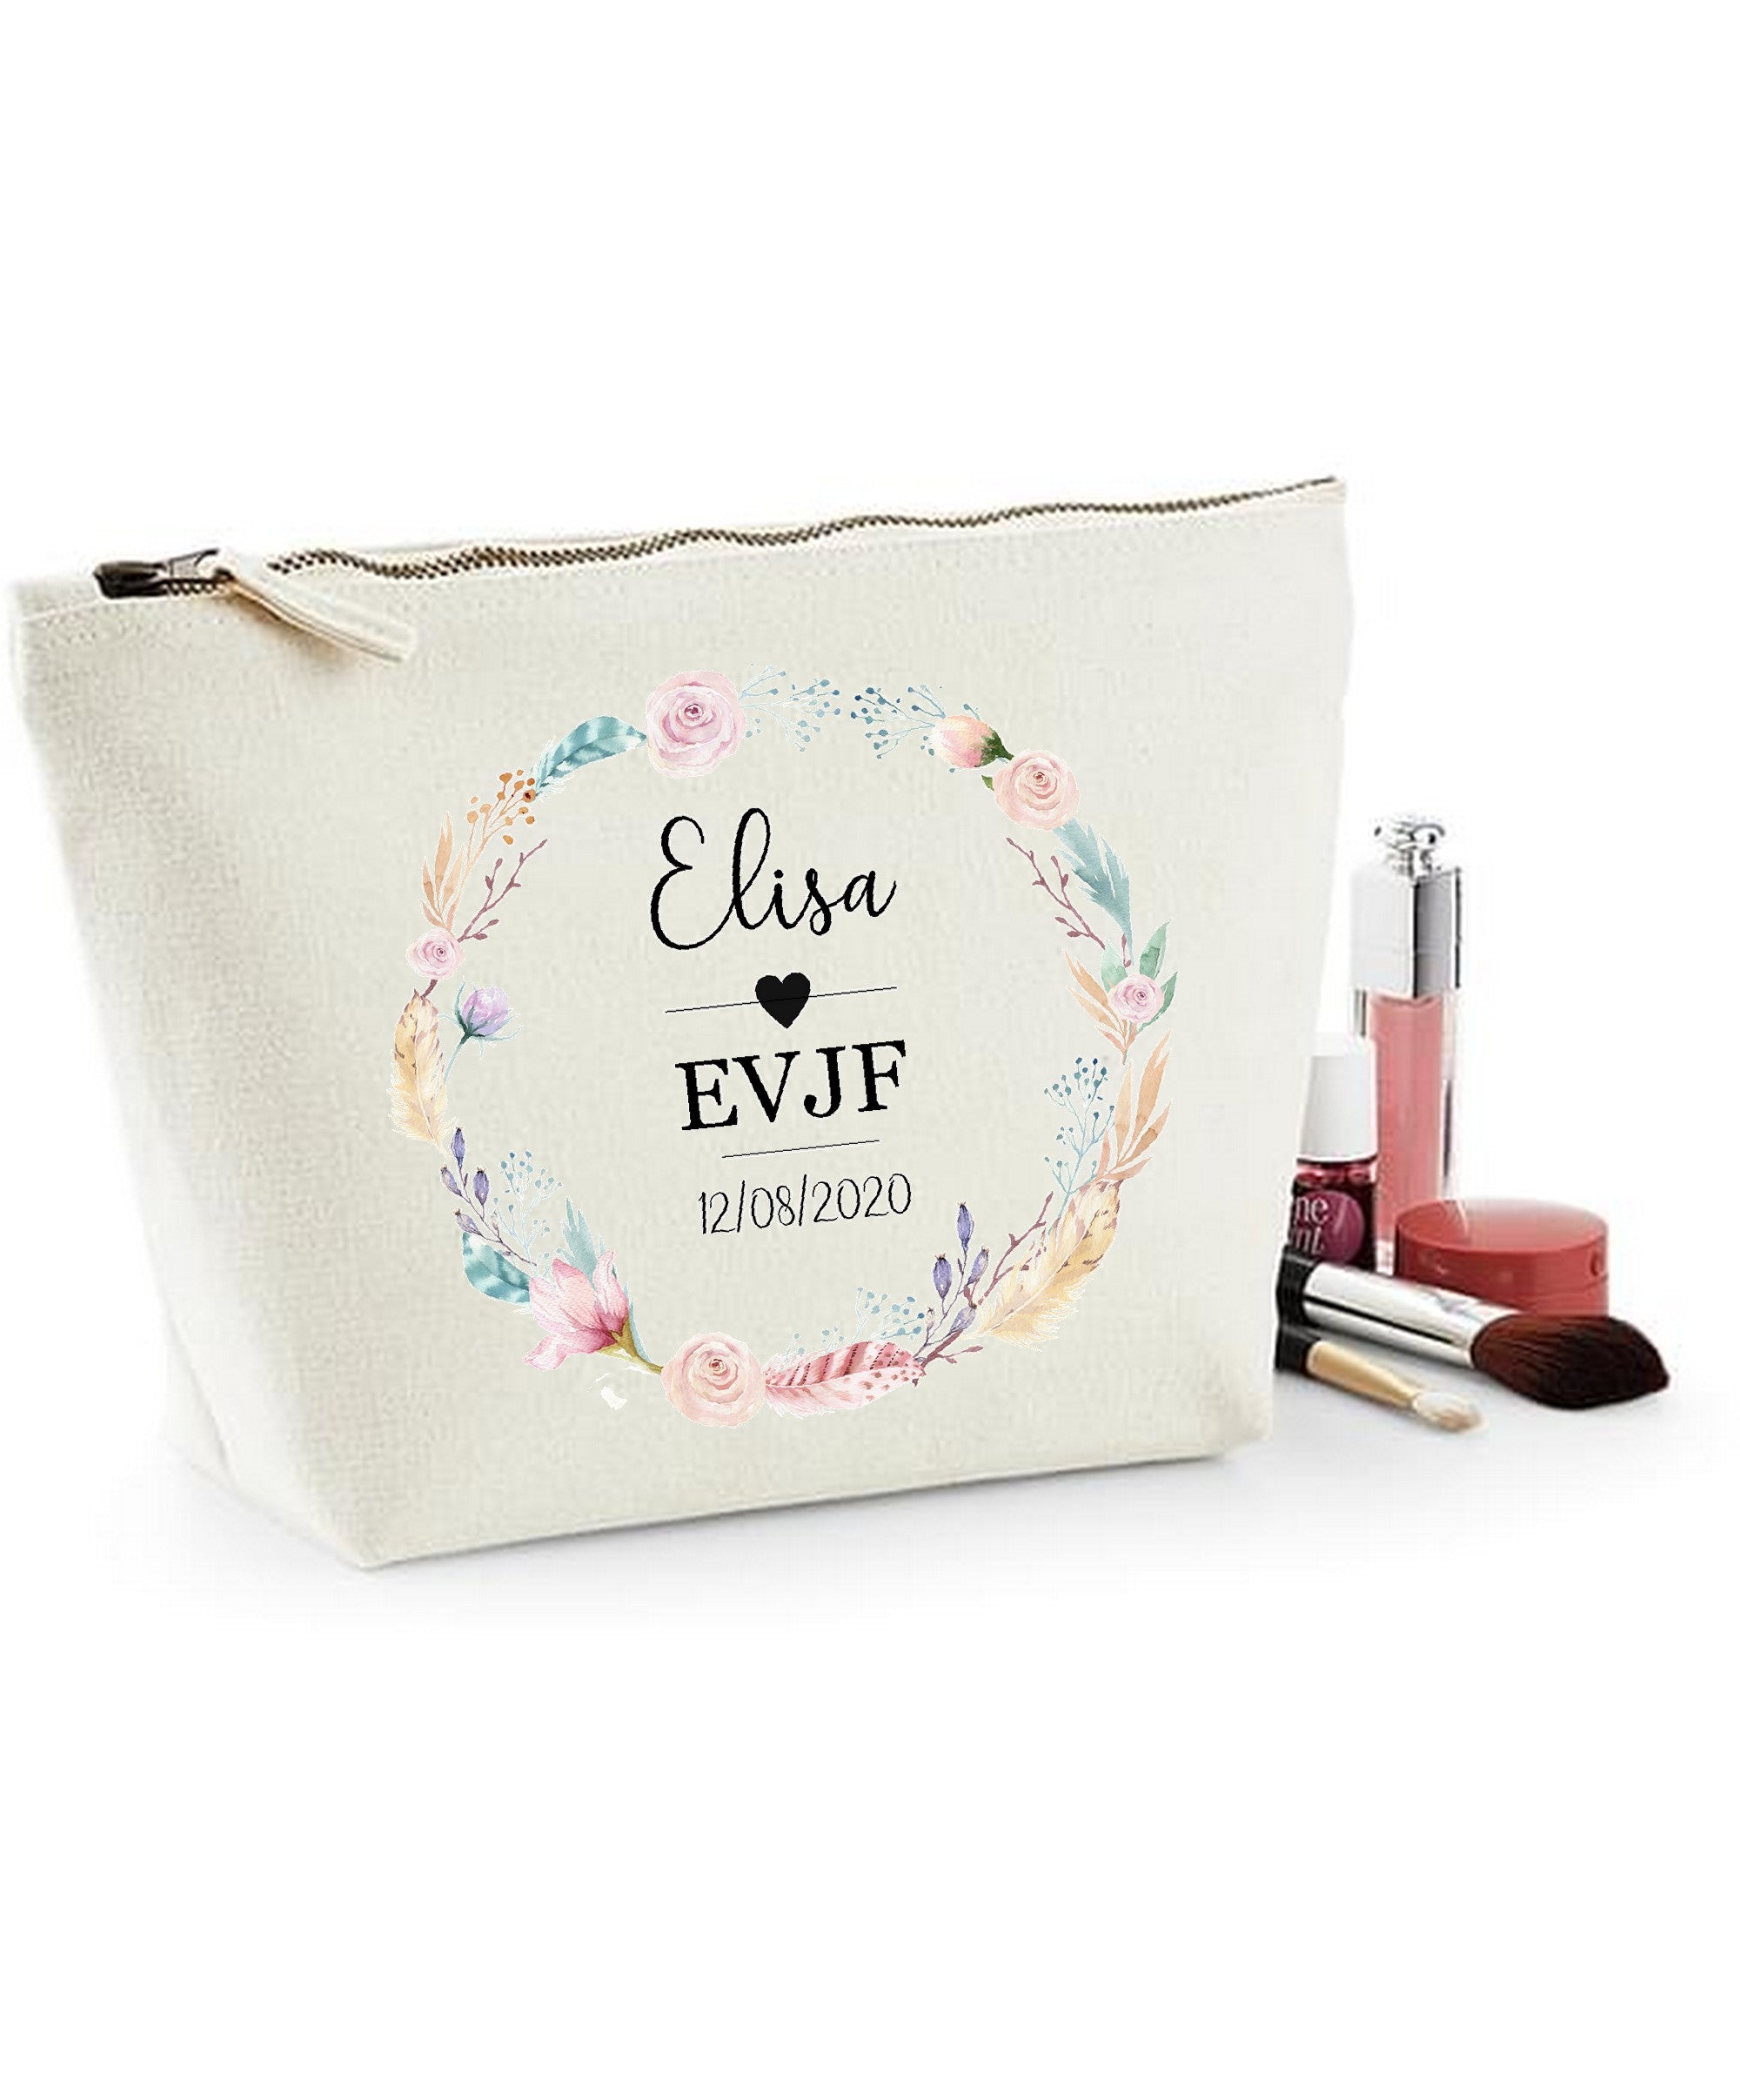 Pochette personnalisable evjf – Cool and the bag